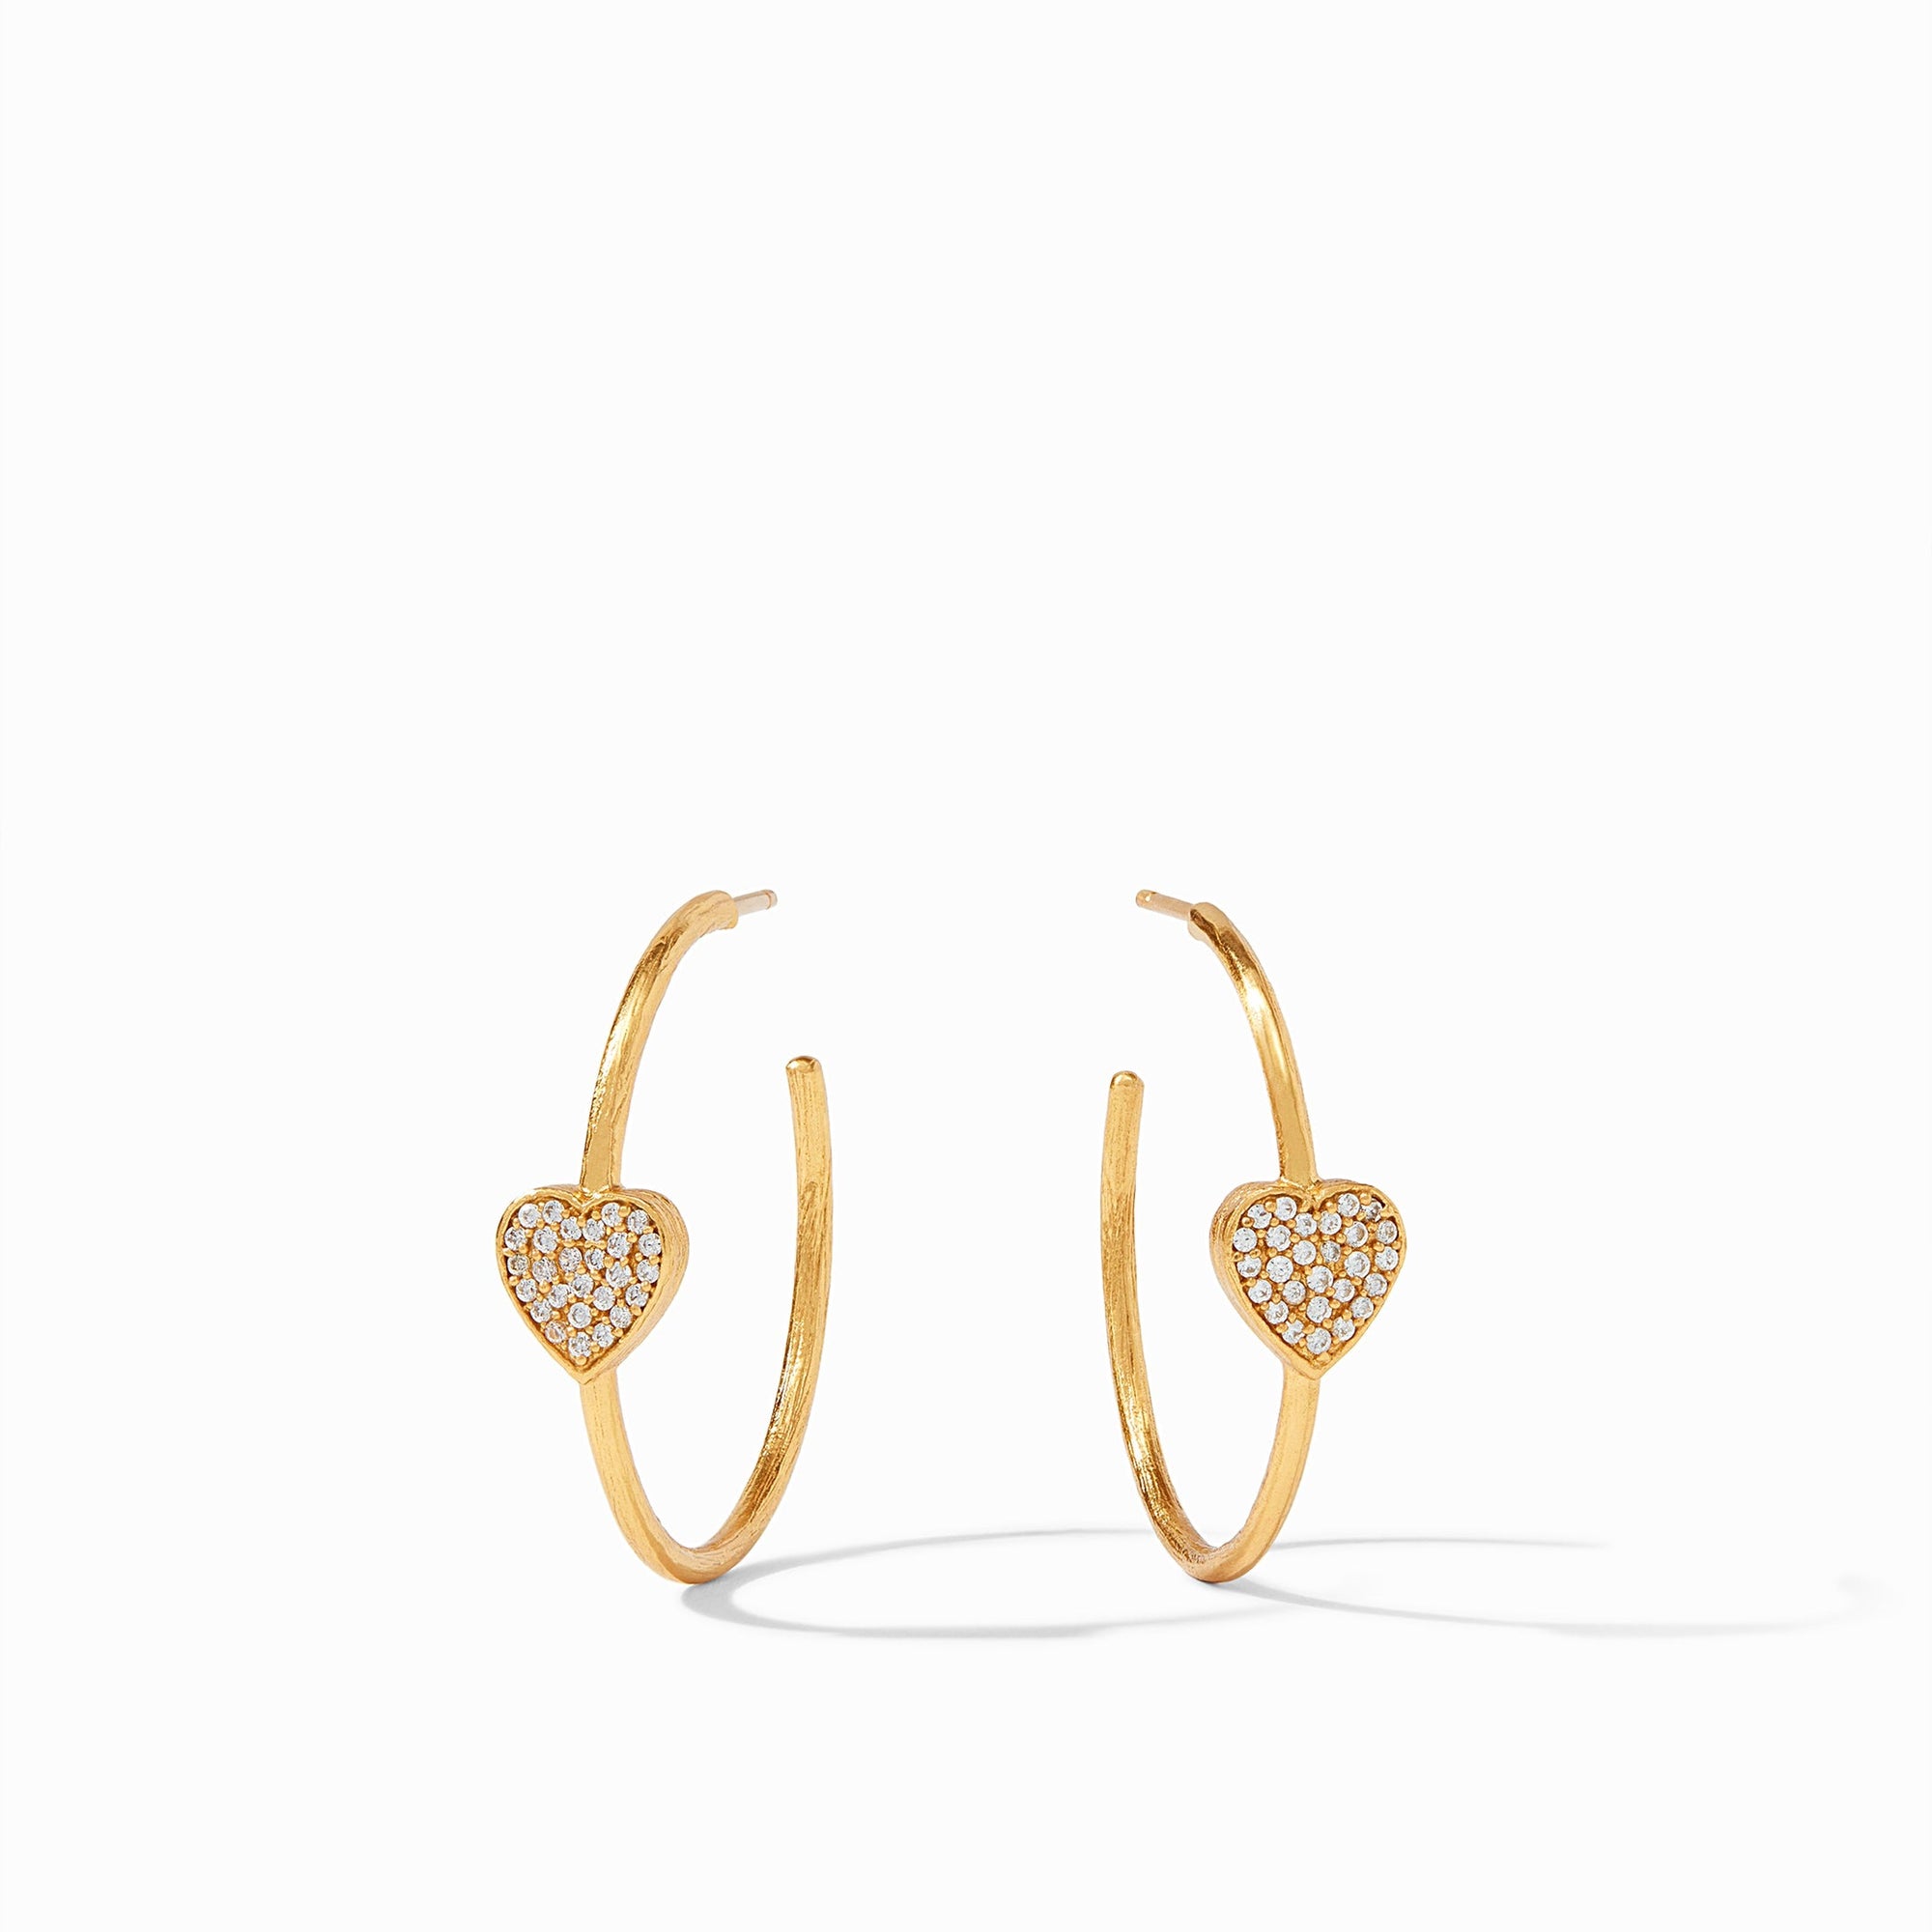 Julie Vos Julie Vos - Heart Pave Hoop Earring Gold - Medium available at The Good Life Boutique